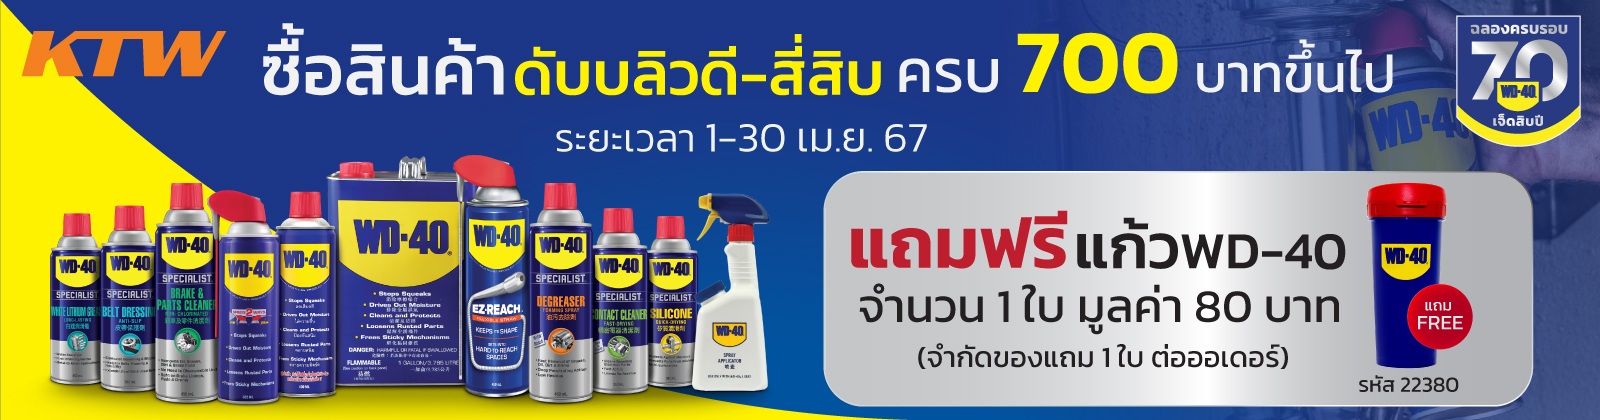 2.WD-40-Pro-70ปี_1600x420_BANNER